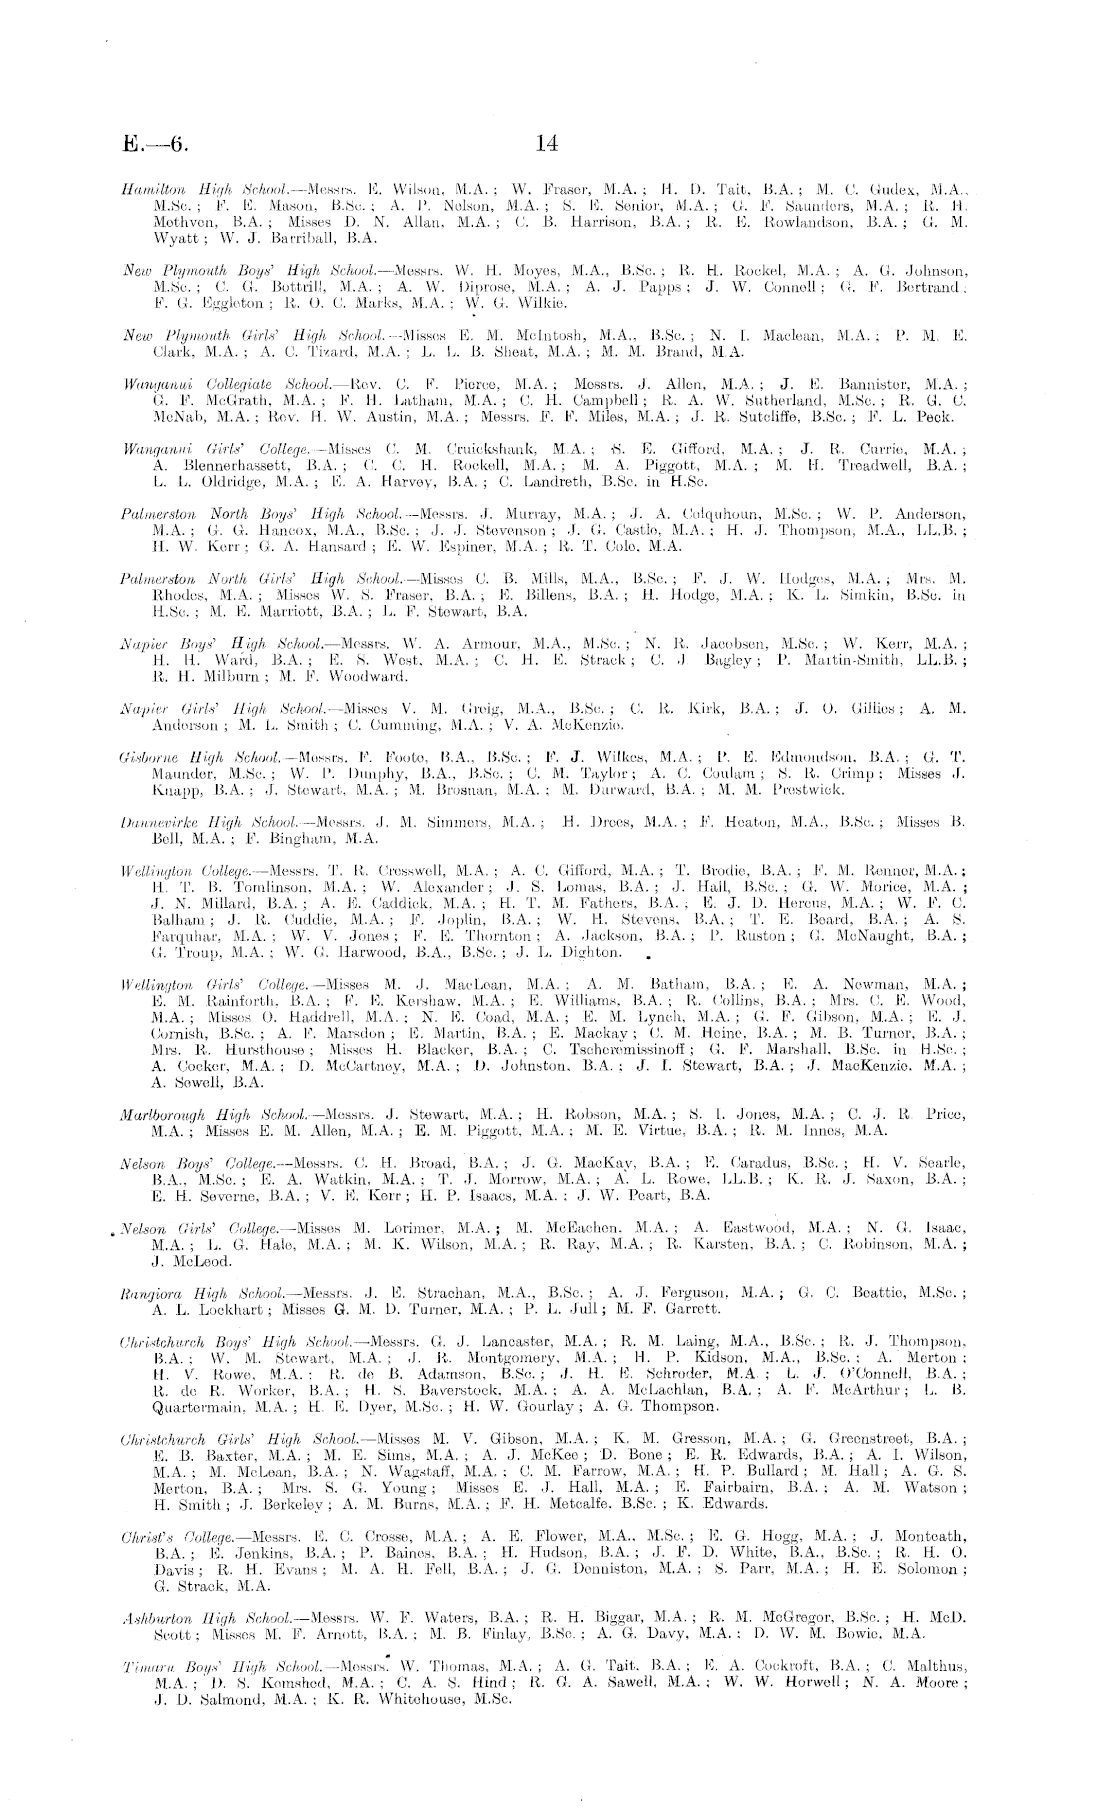 Papers Past Parliamentary Papers Appendix To The Journals Of The House Of Representatives 1923 Session I Ii Page 14